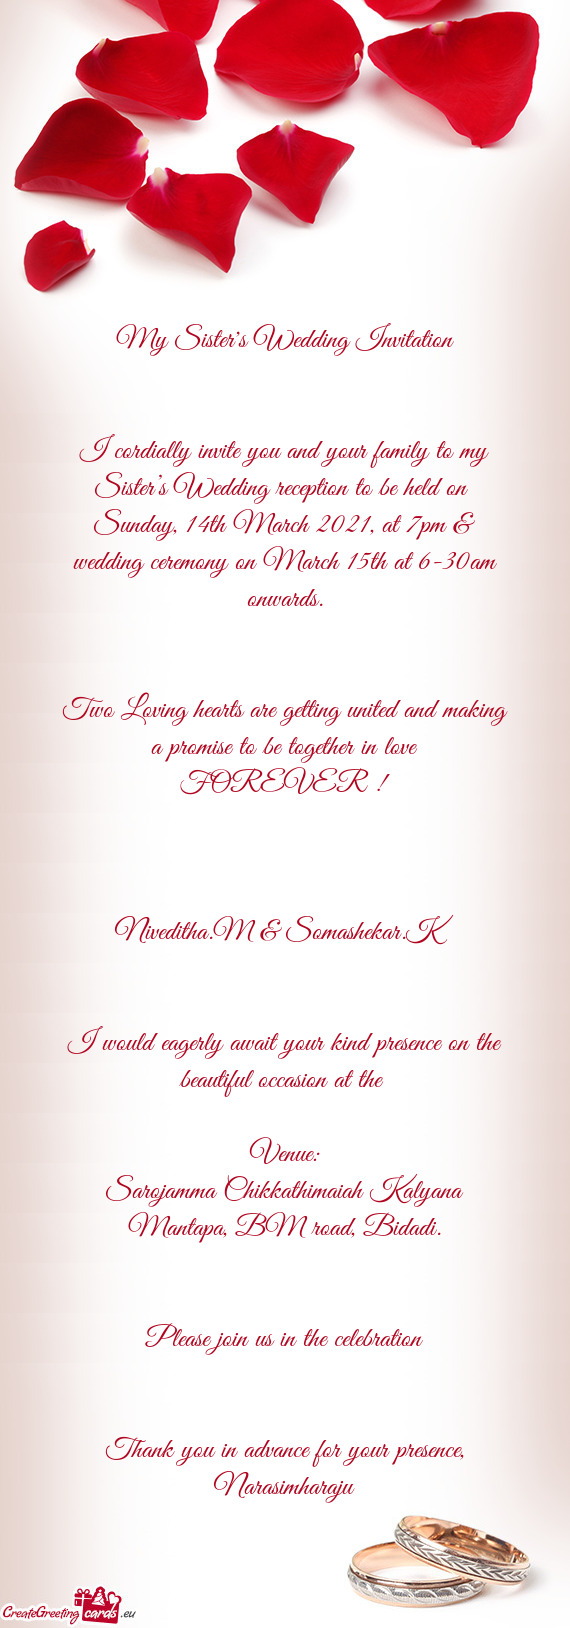 Sunday, 14th March 2021, at 7pm & wedding ceremony on March 15th at 6-30am onwards